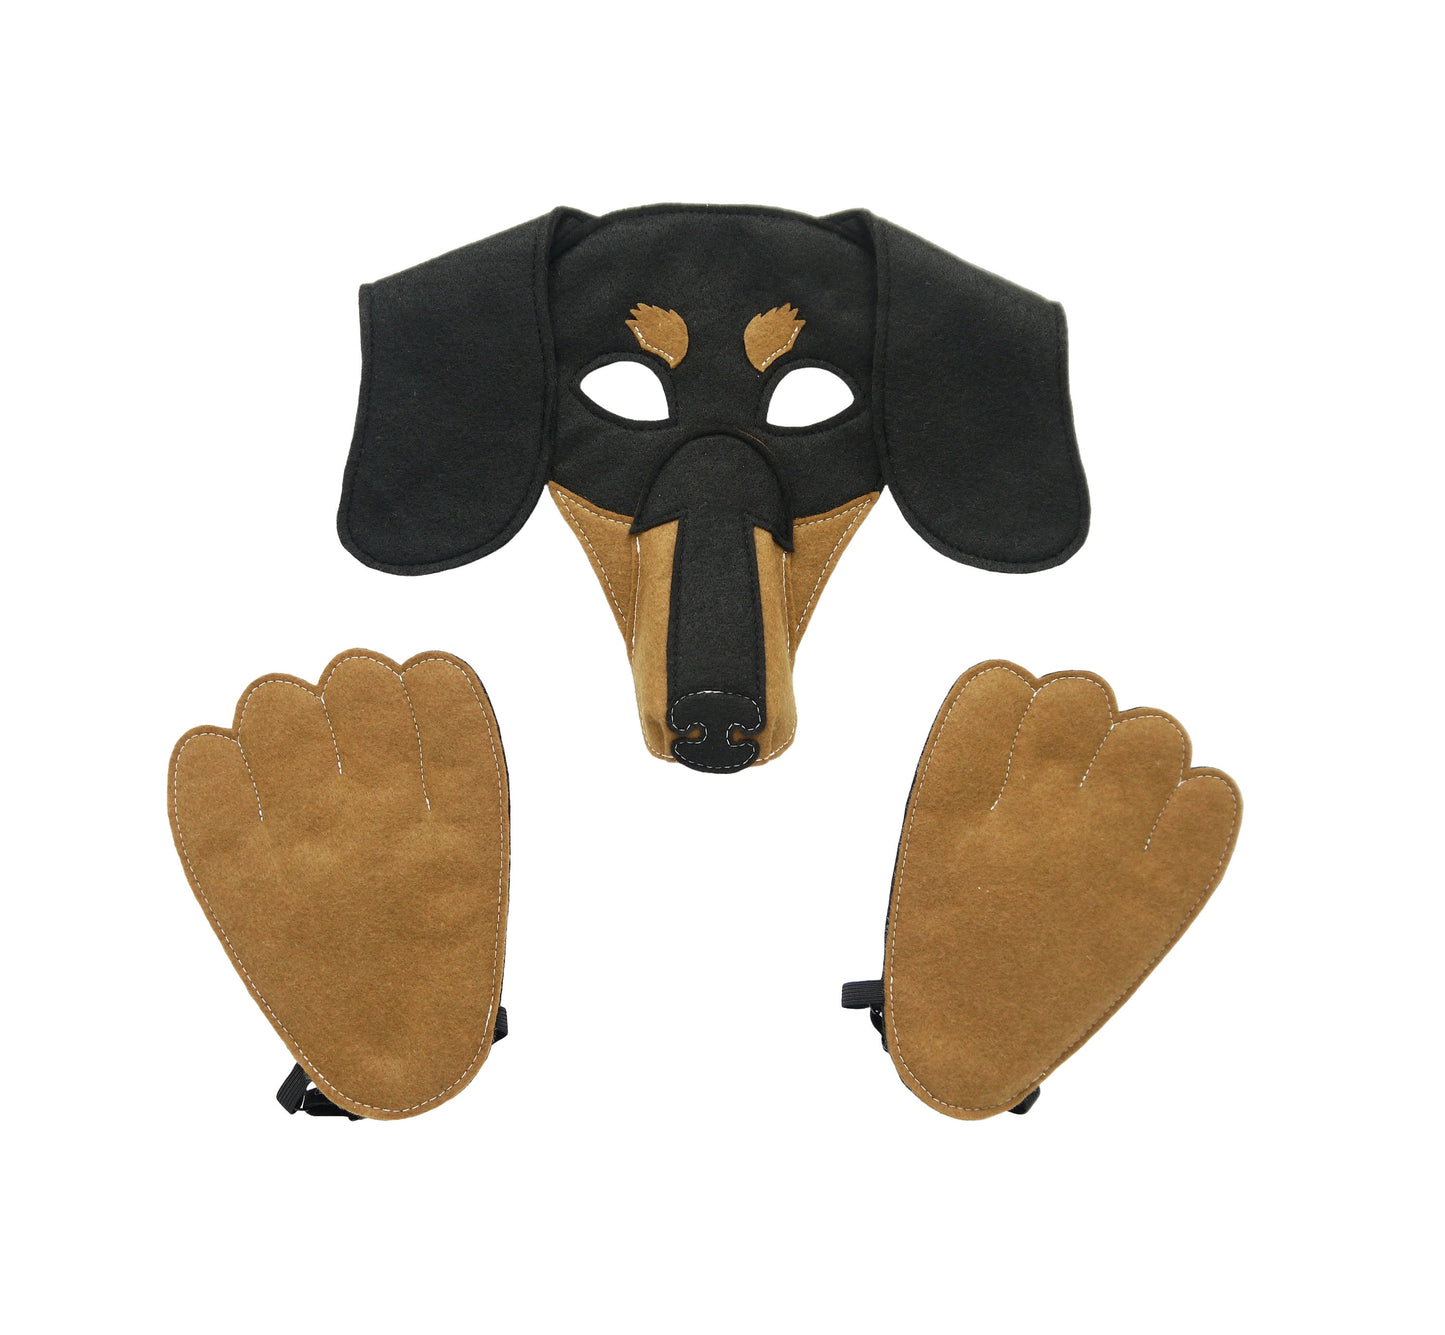 Dachshund Mask and paws costume, Father's day gift, Sausage Dog, gift, play production Theatre, dog lover gift, Adult and children’s sizes